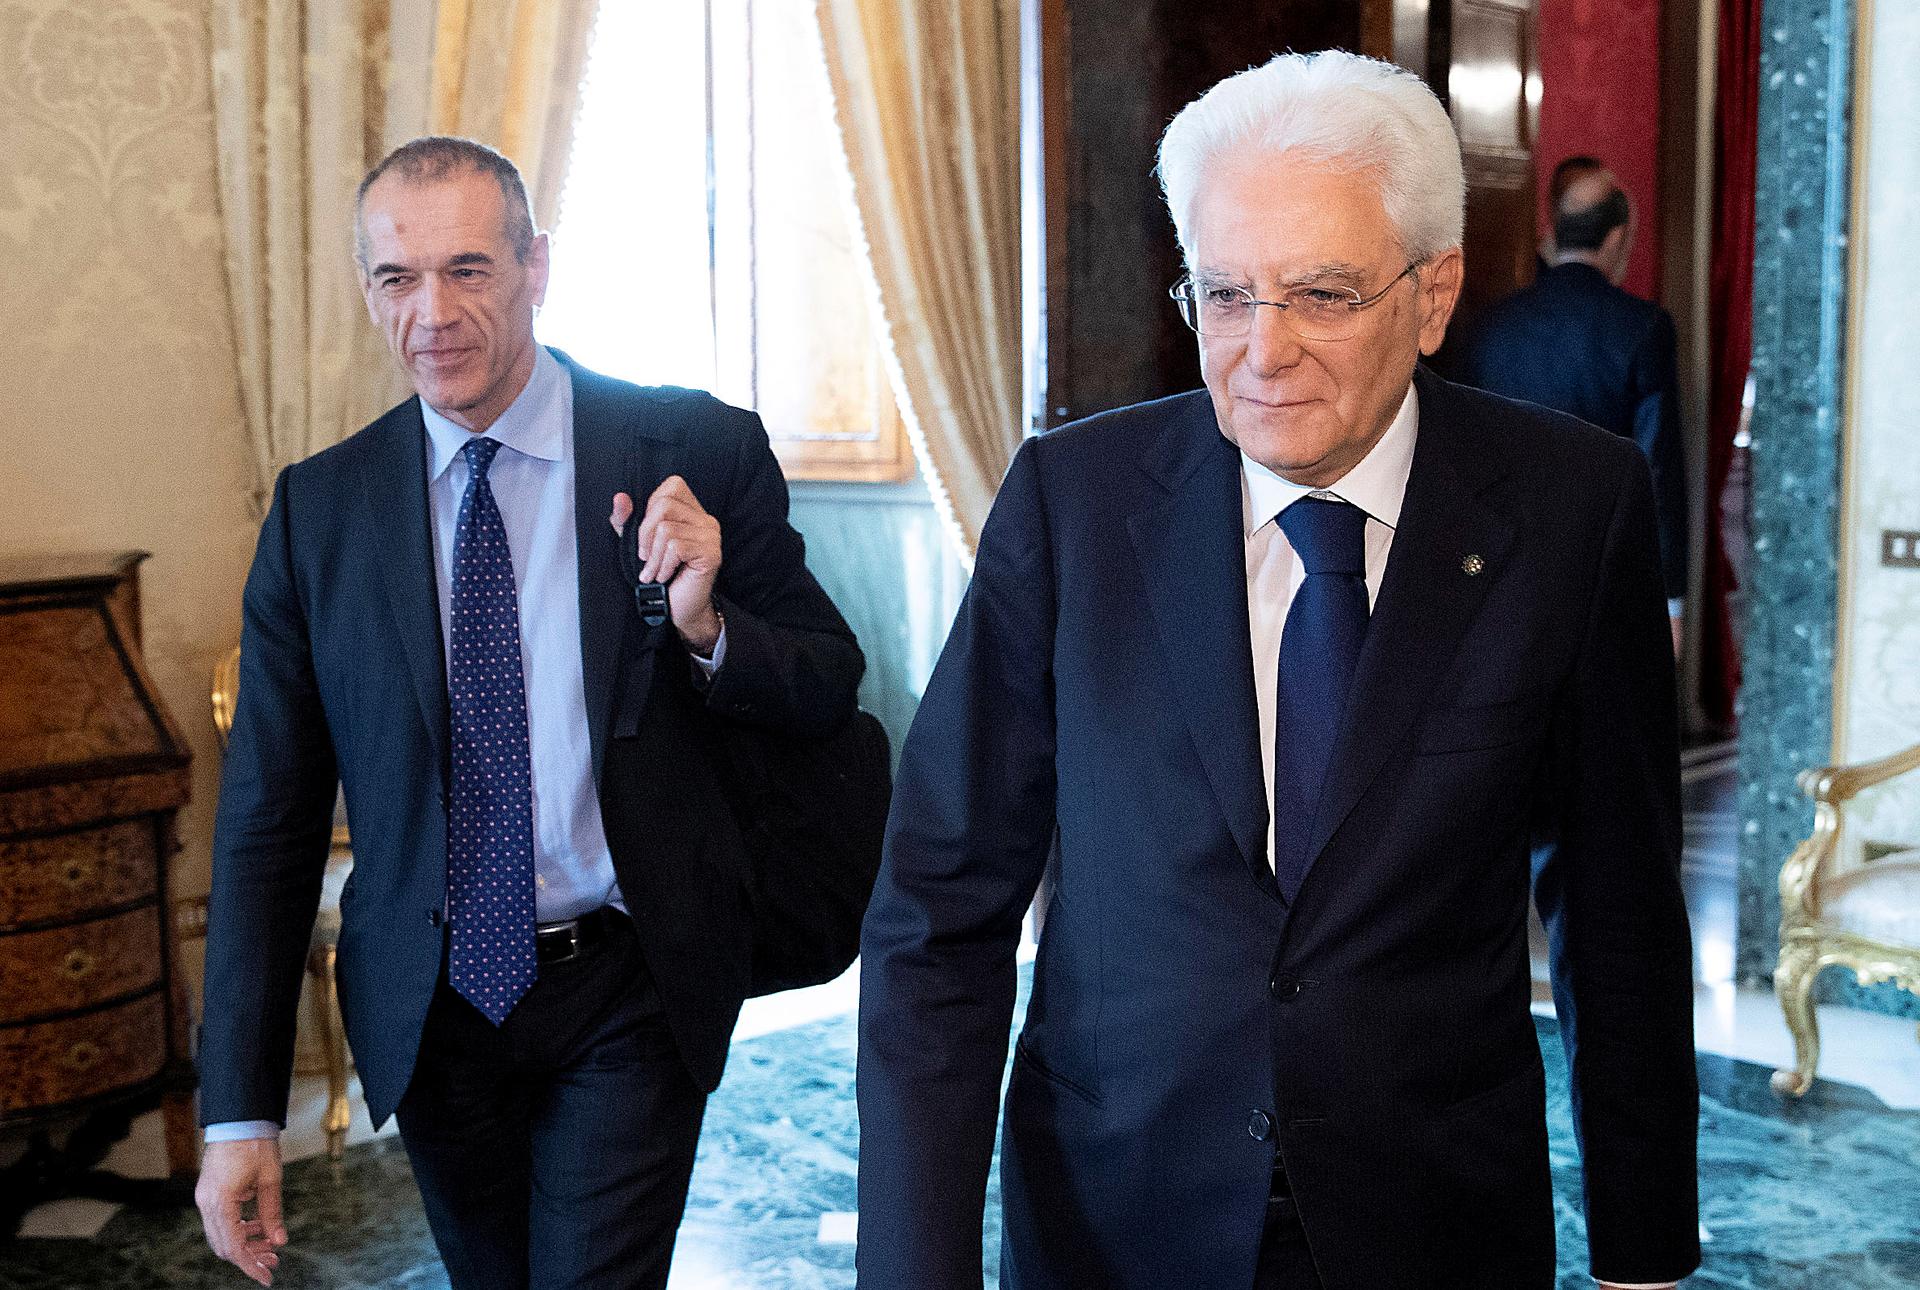 Carlo Cottarelli arrives for a meeting with the Italian President Sergio Mattarella walk next to each other 